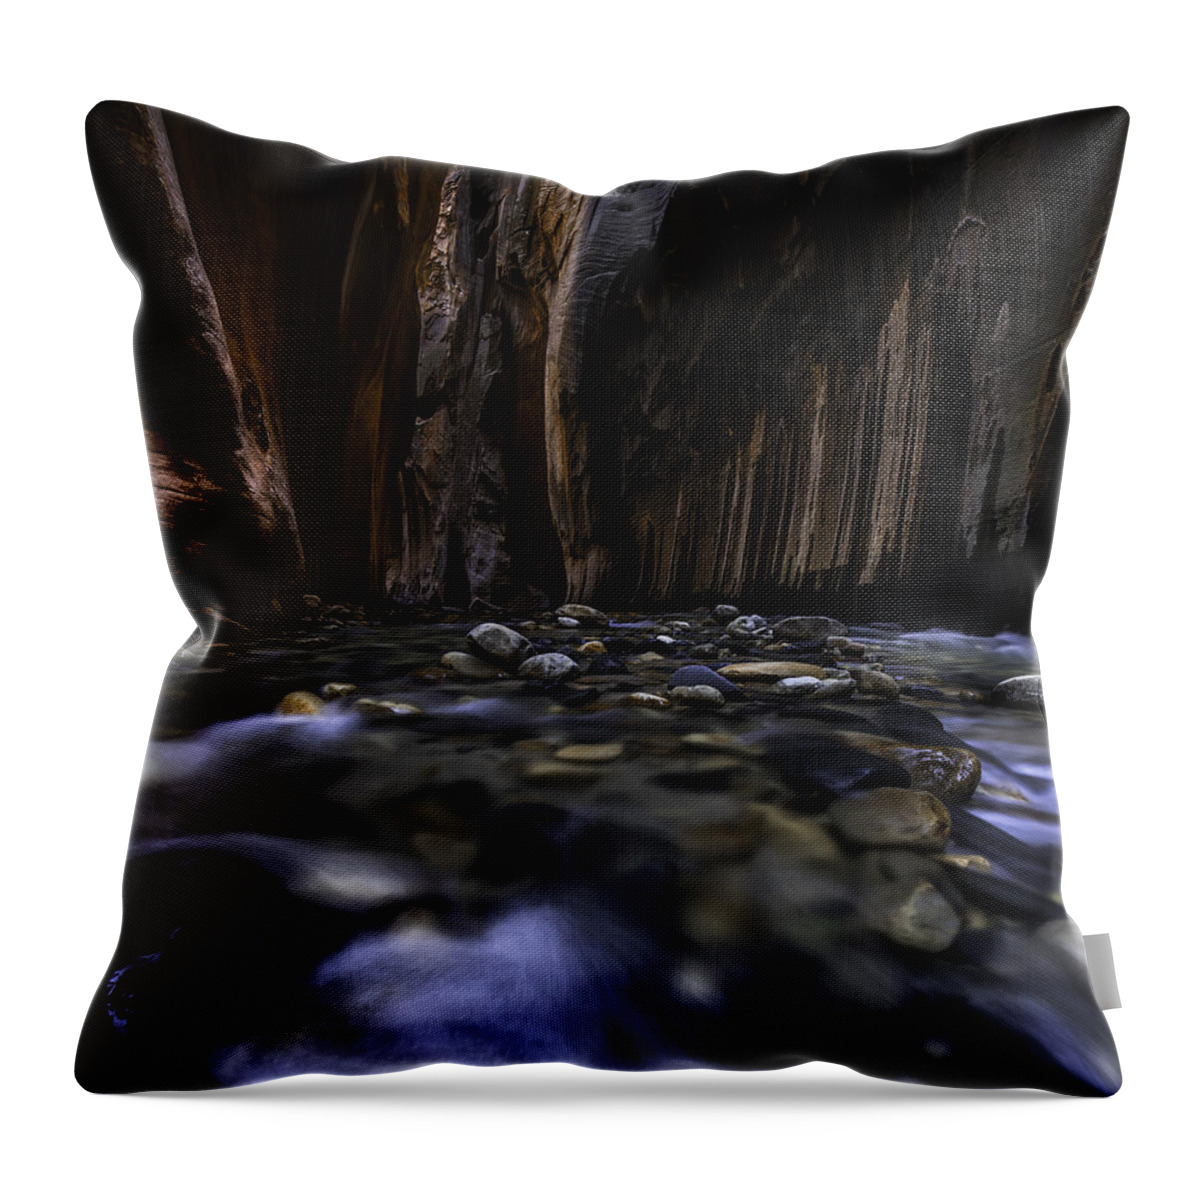 Zion Throw Pillow featuring the photograph The Narrows at Zion National Park - 2 by Larry Marshall